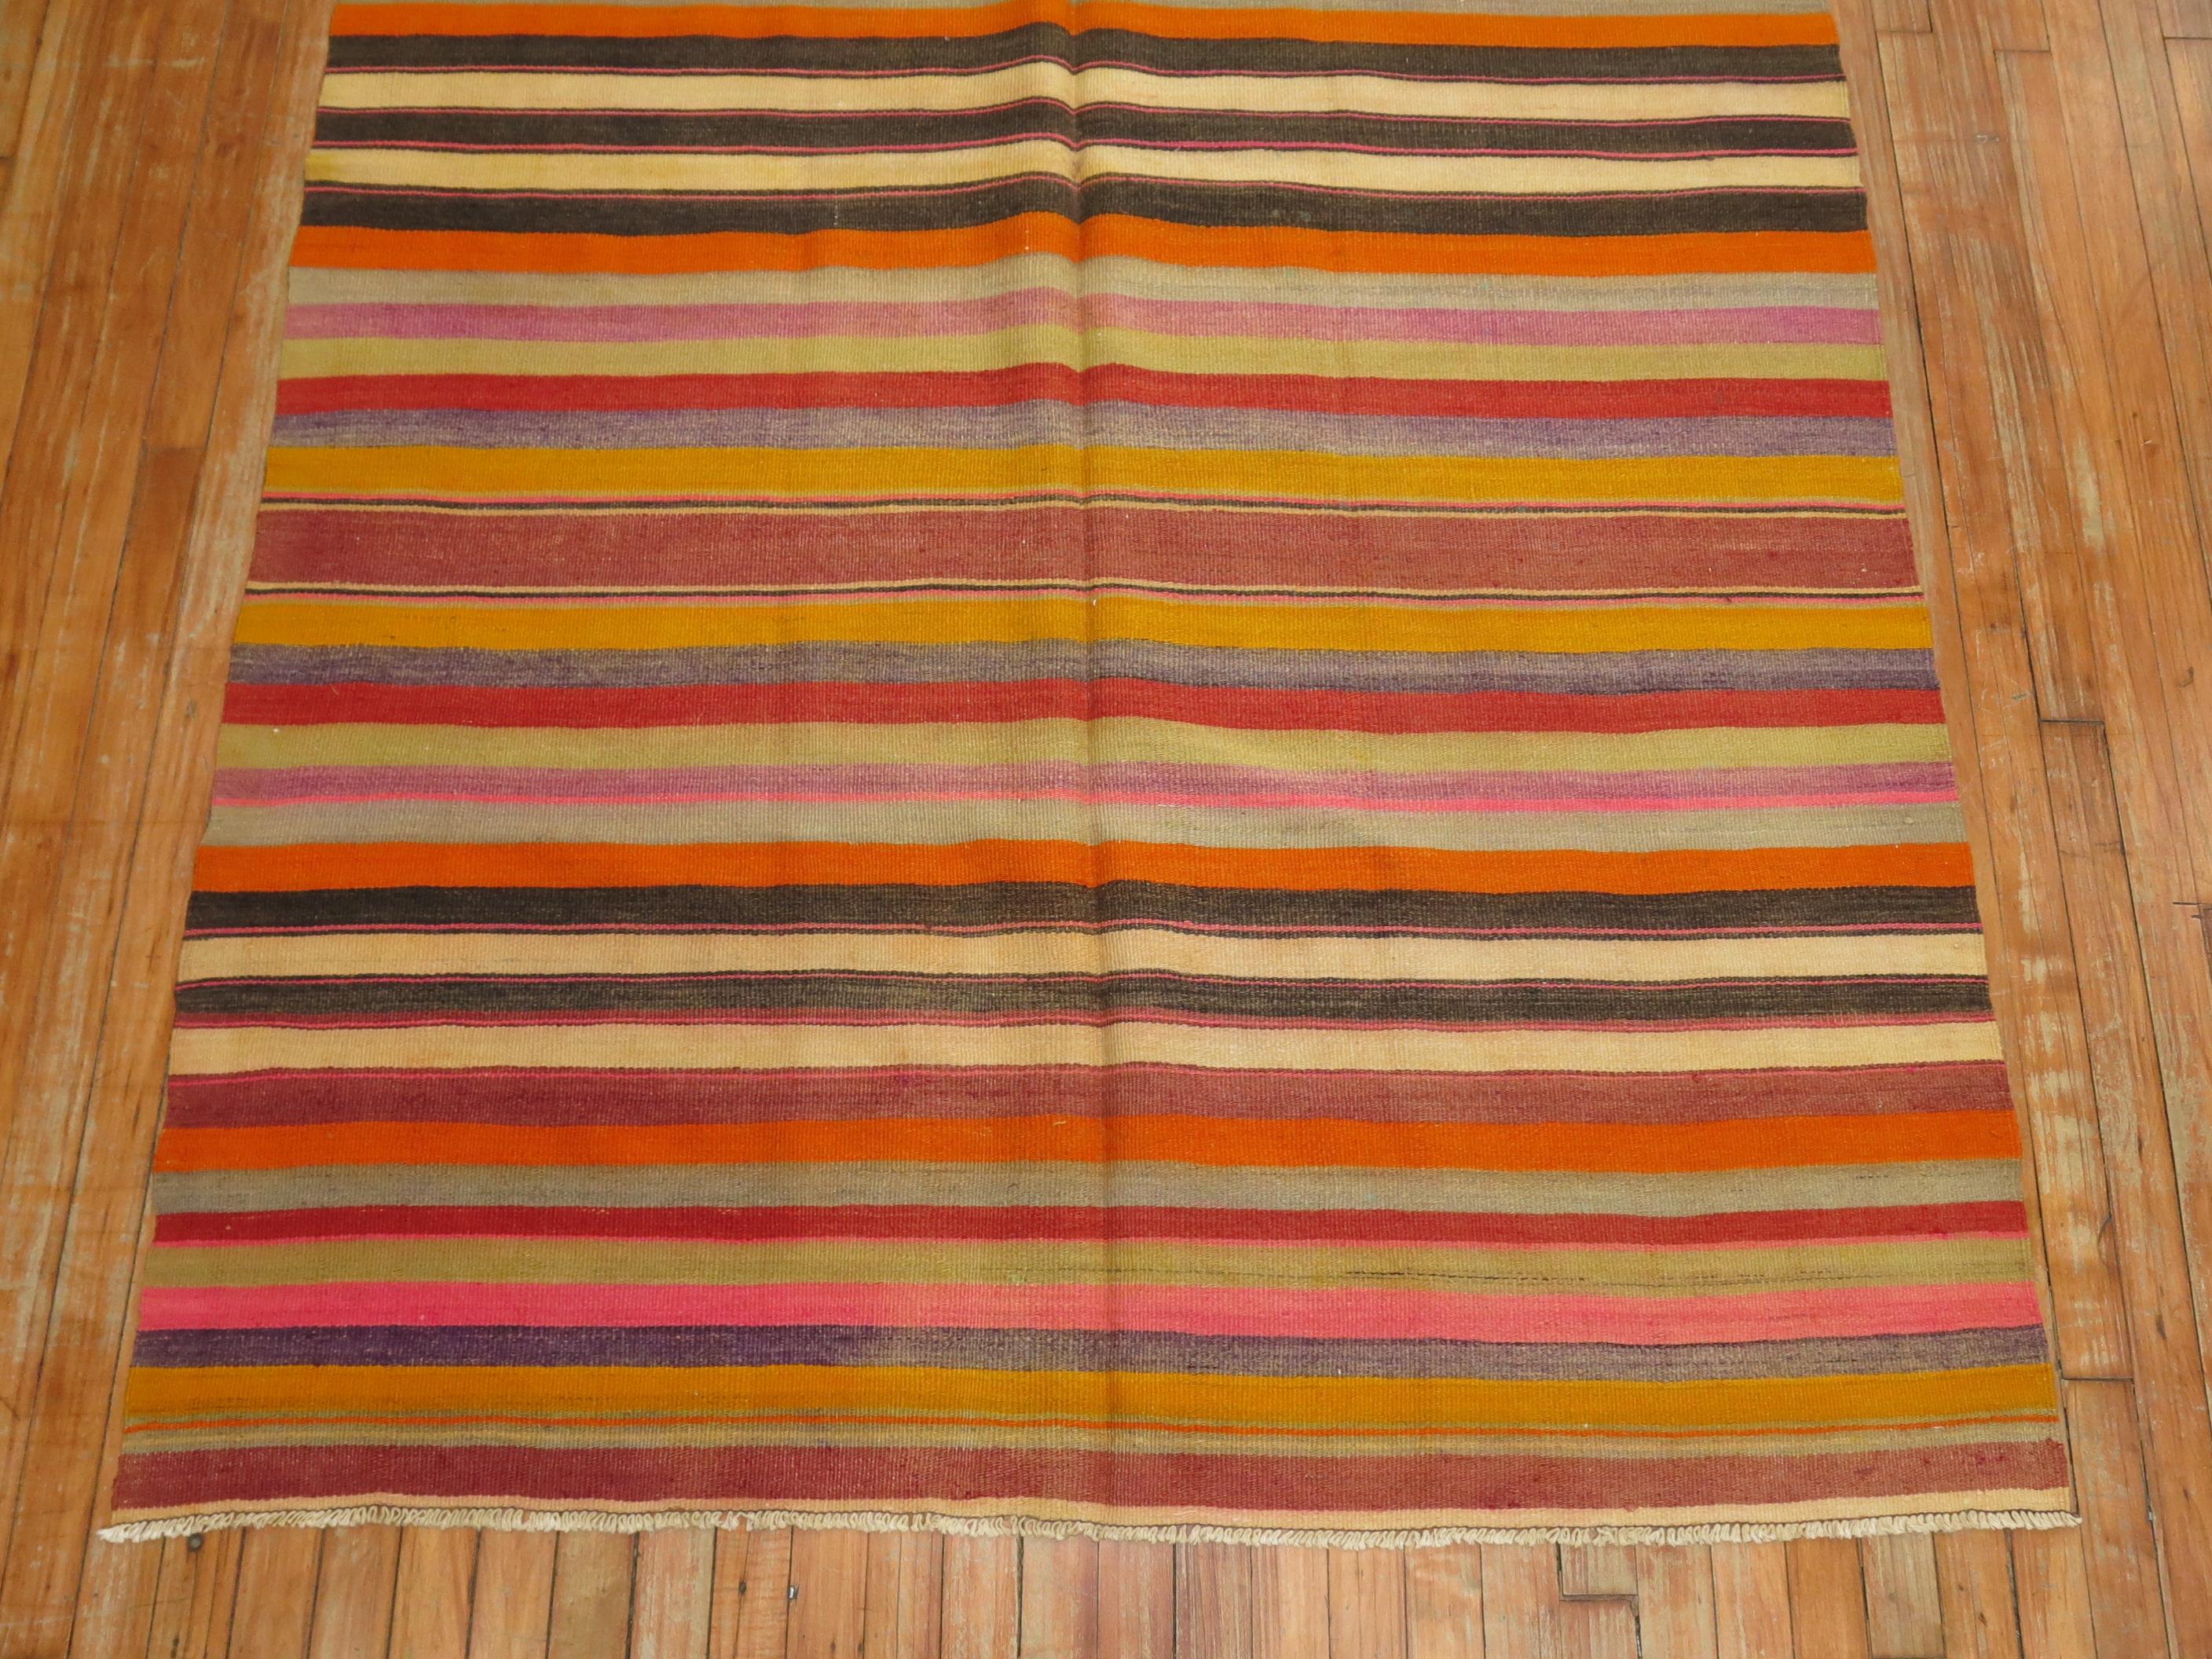 Turkish Kilim from the mid-20th century with a striped design in an array of bright colors.

Measures: 4'10'' x 8'4''.